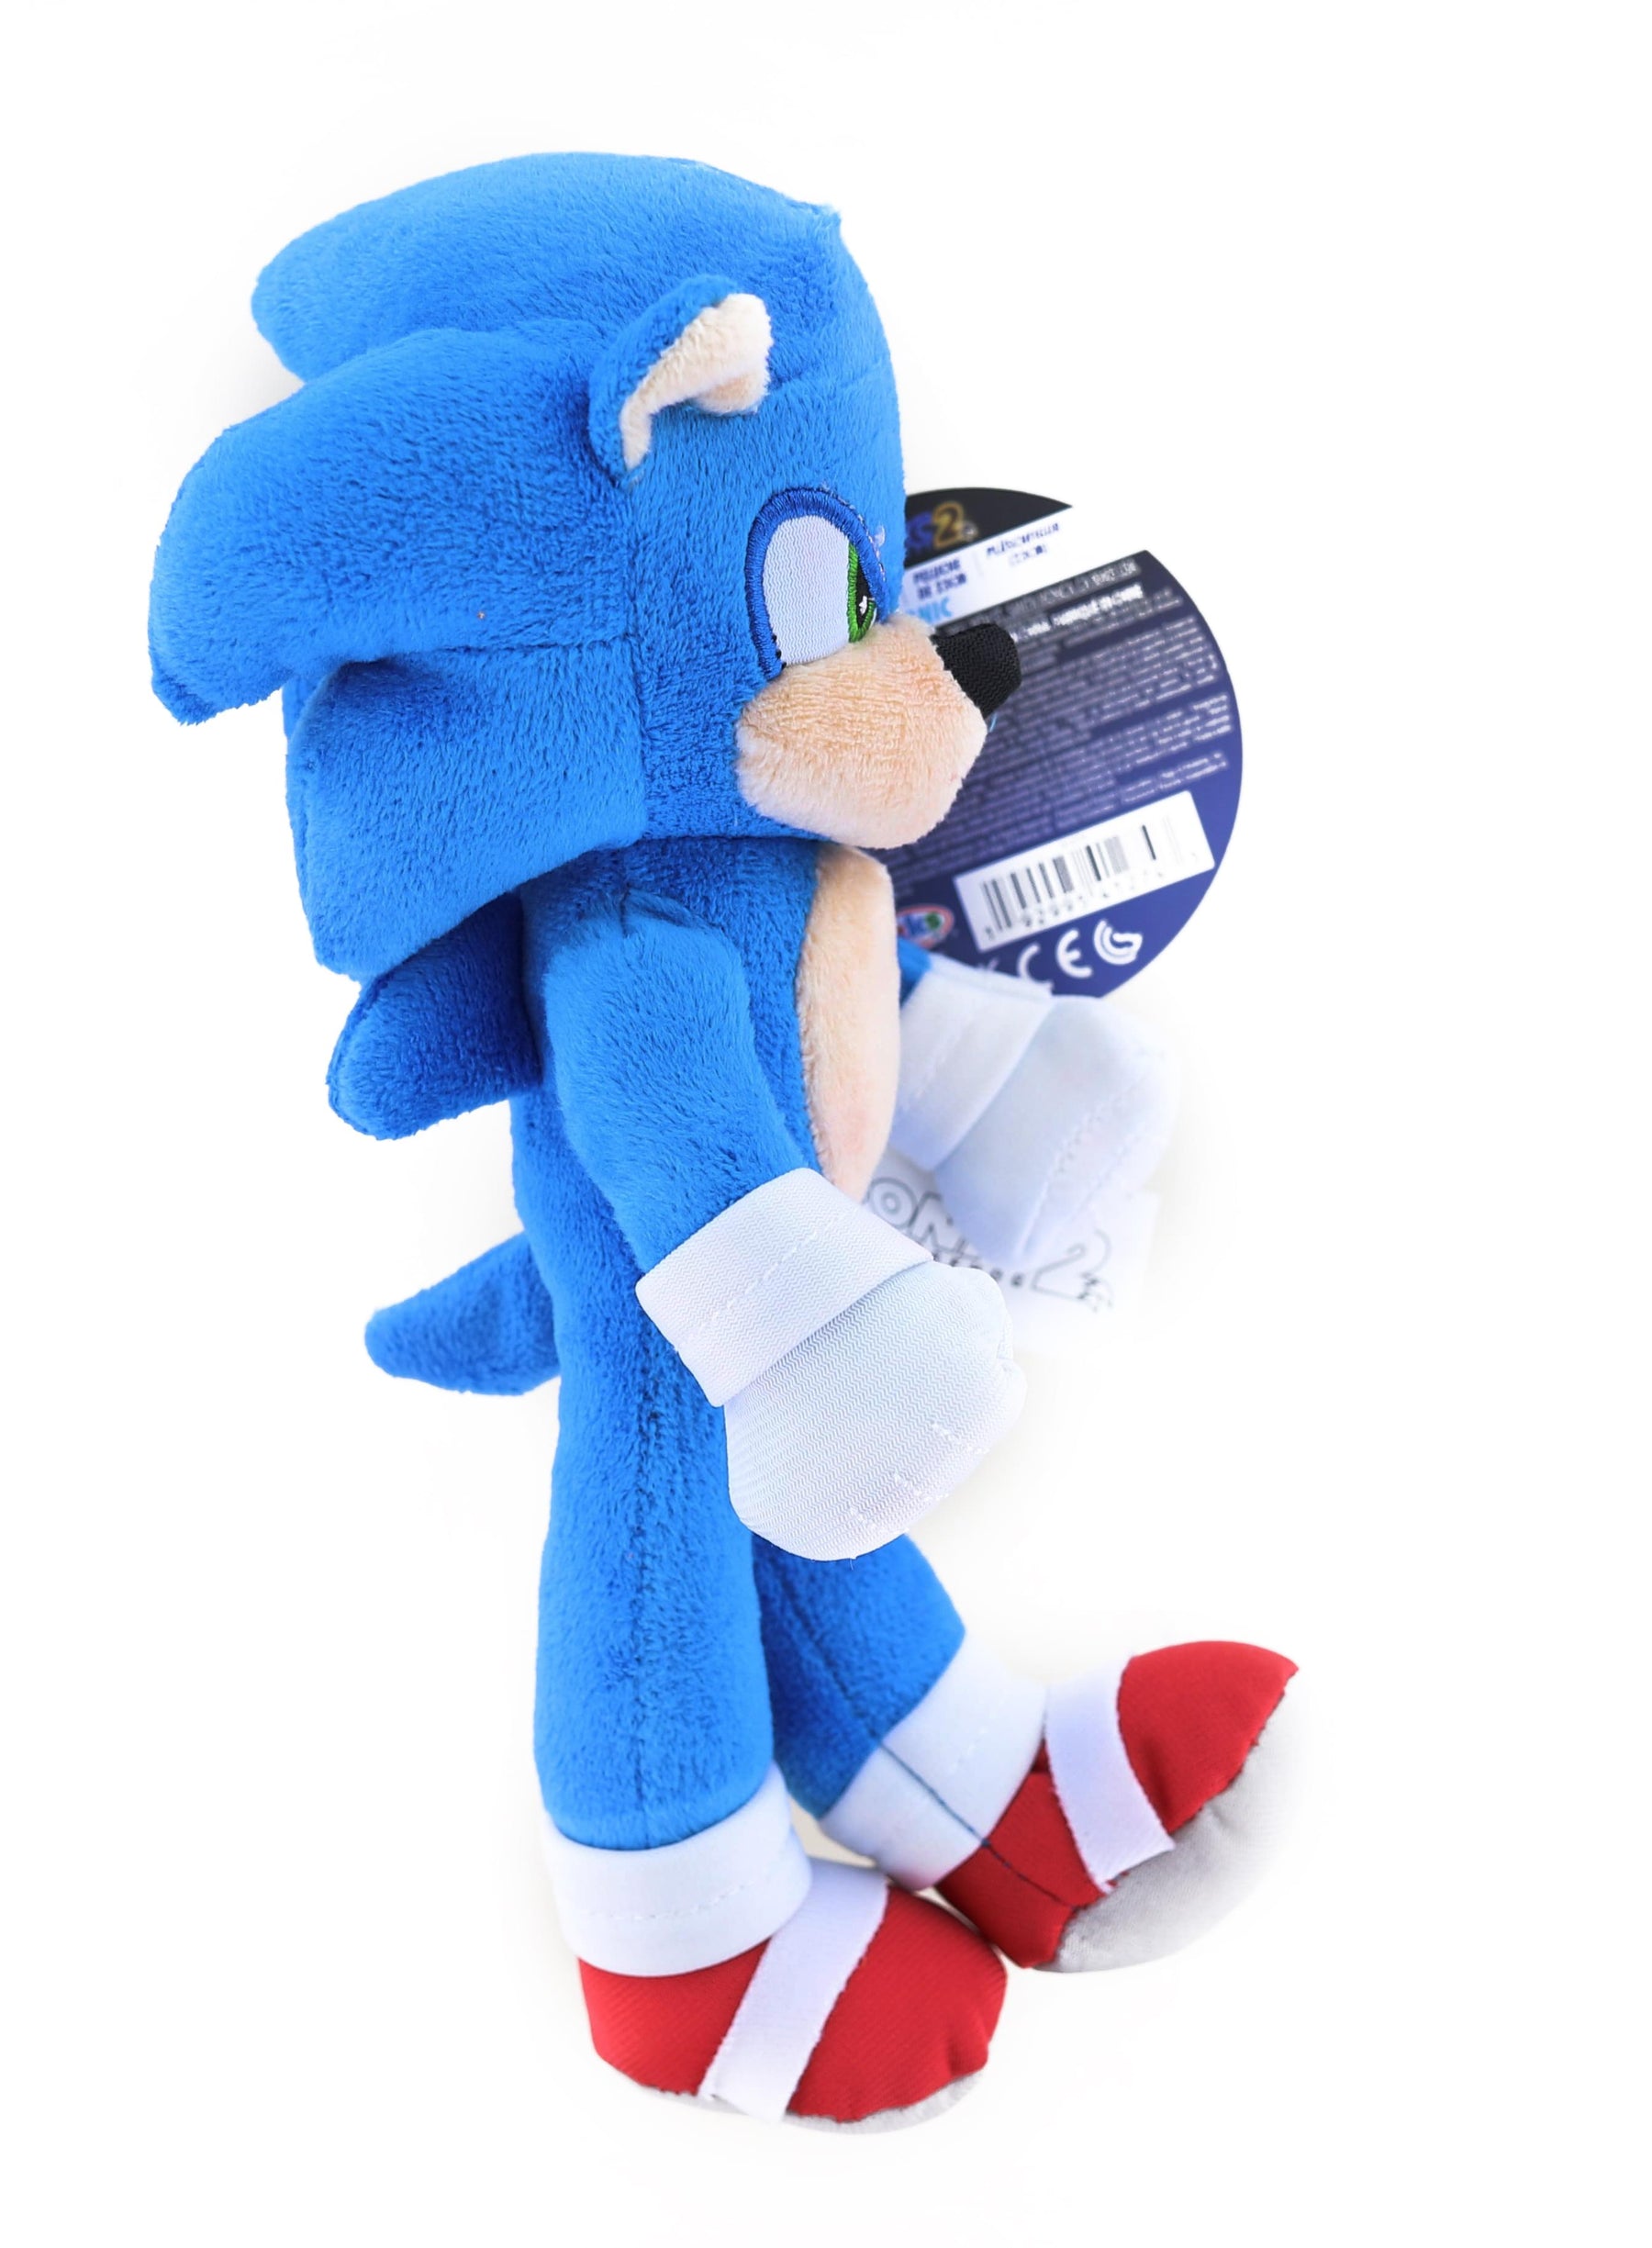  Sonic The Hedgehog 2 9-Inch Plush Collectible Toy 3